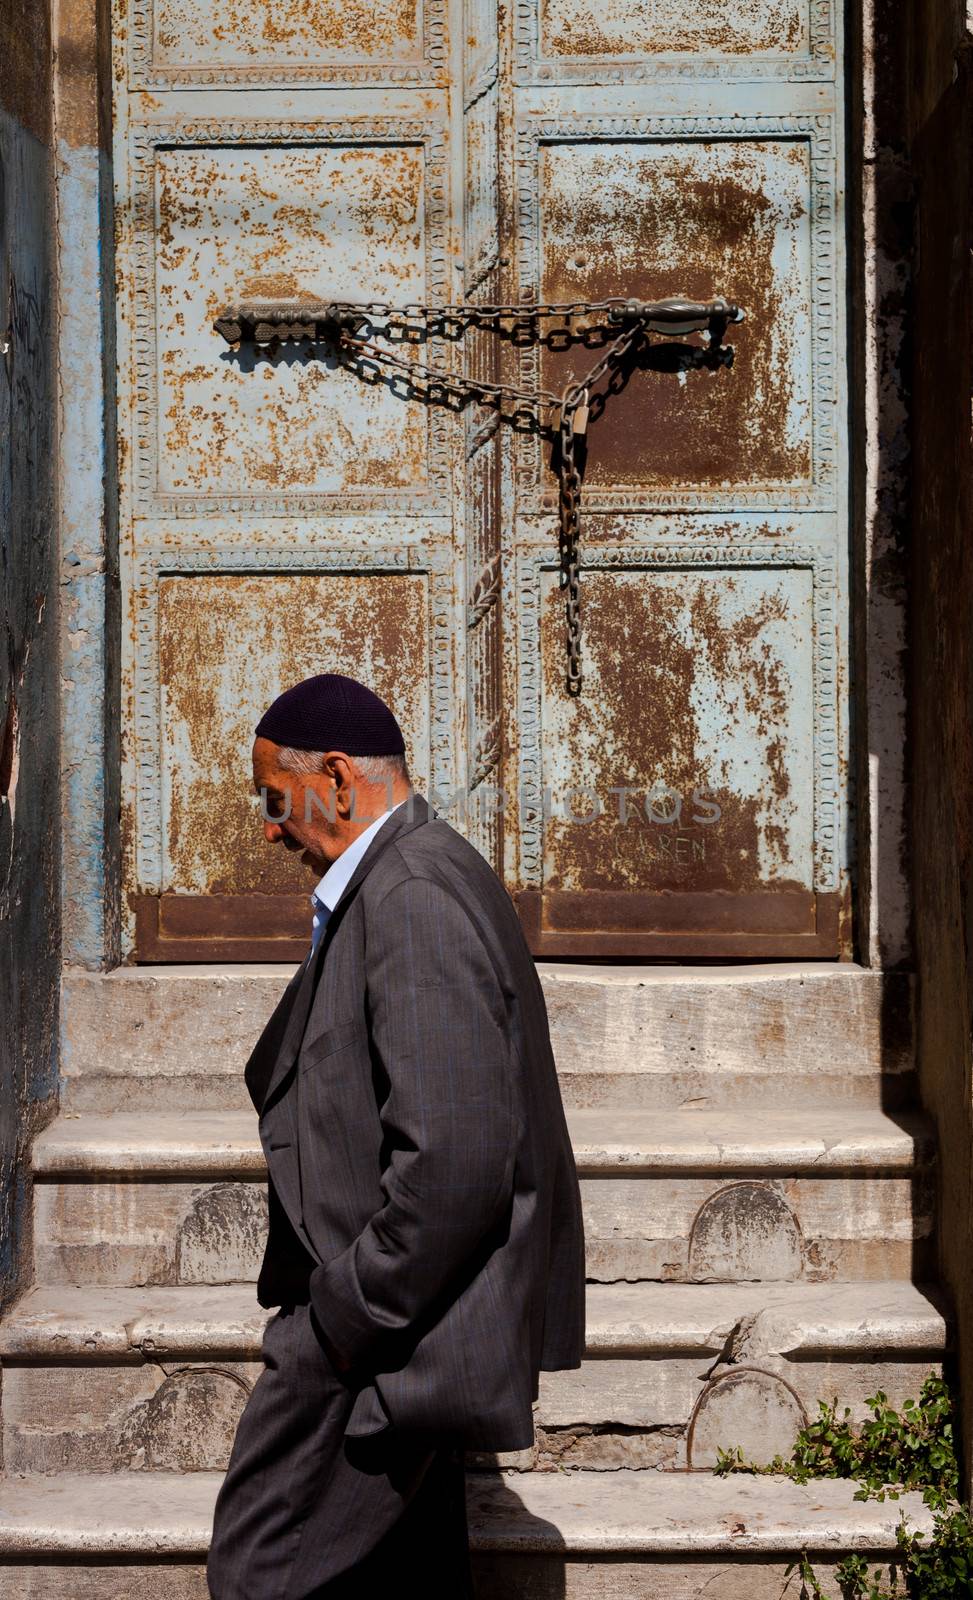 ISTANBUL, TURKEY ��� APRIL 28: Muslim man passing by doorway prior to ANZAC day on April 28, 2012 in Ankara, Turkey.  Each year patriotic Turks honor those fallen at the battle of Galipoli during World War I.